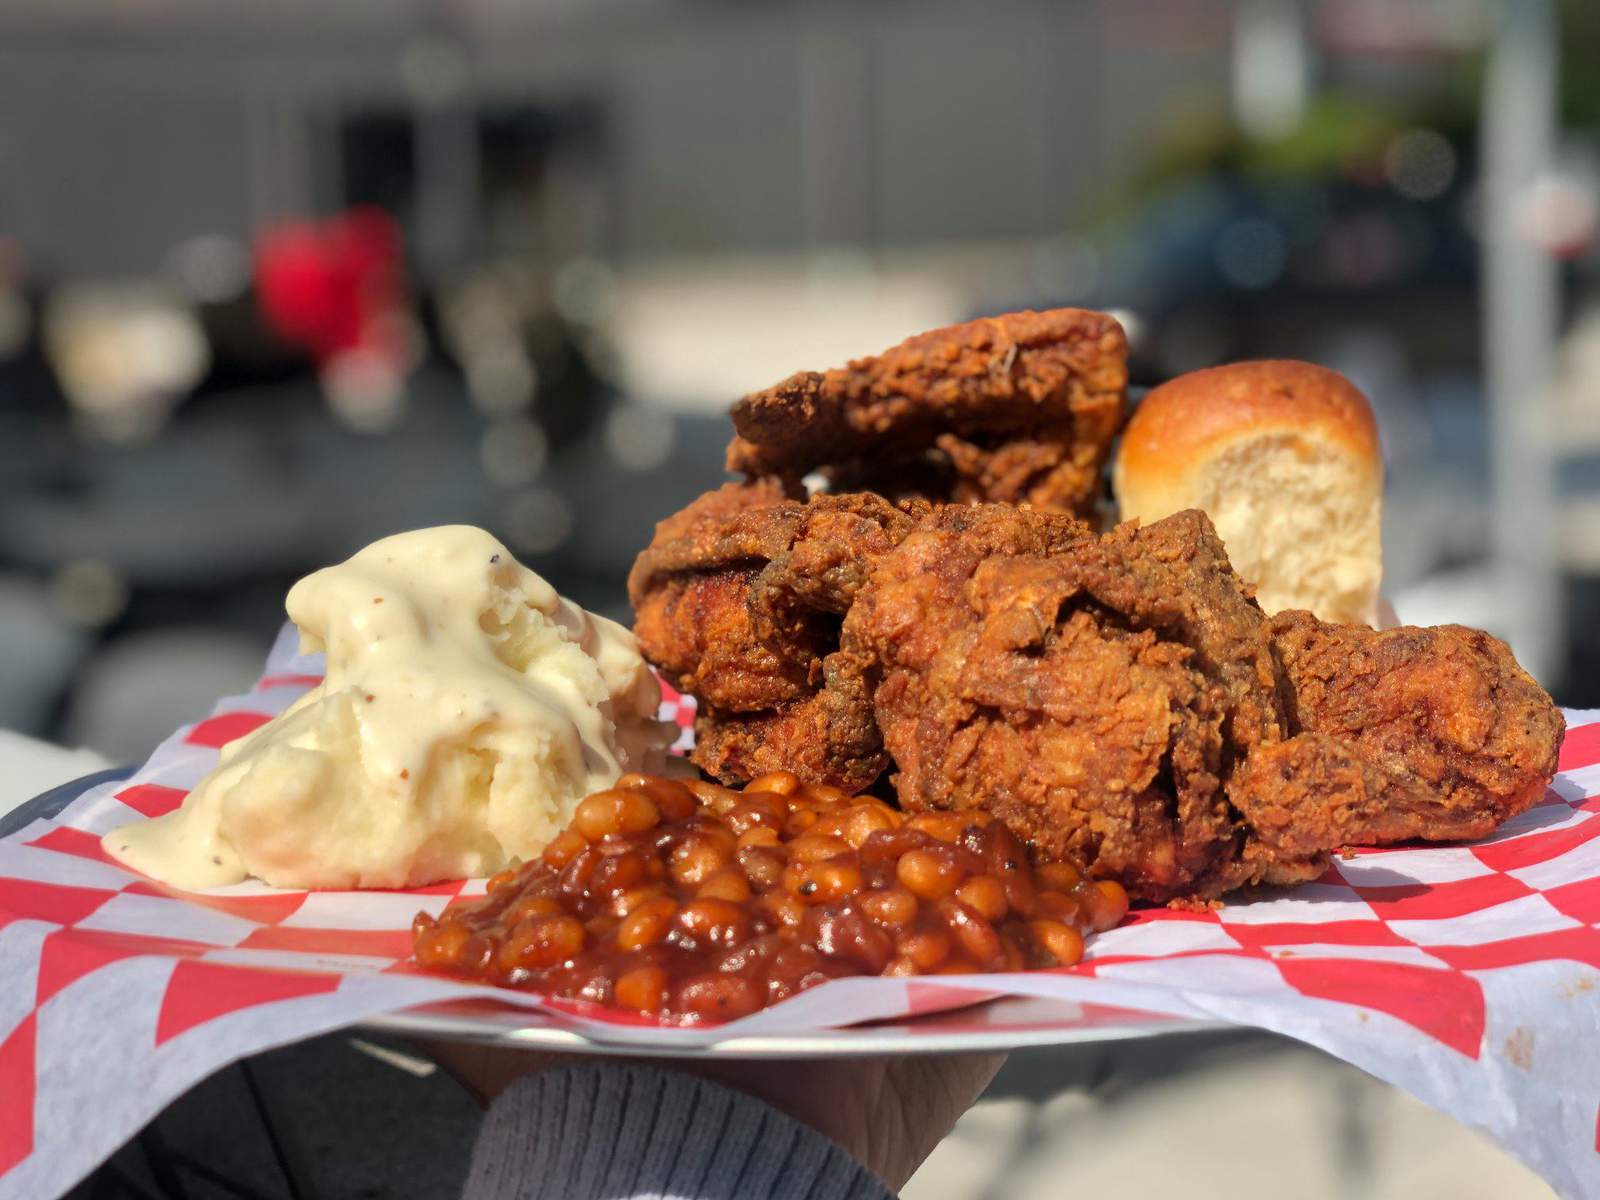 Killens southern comfort food restaurant opens in the Heights